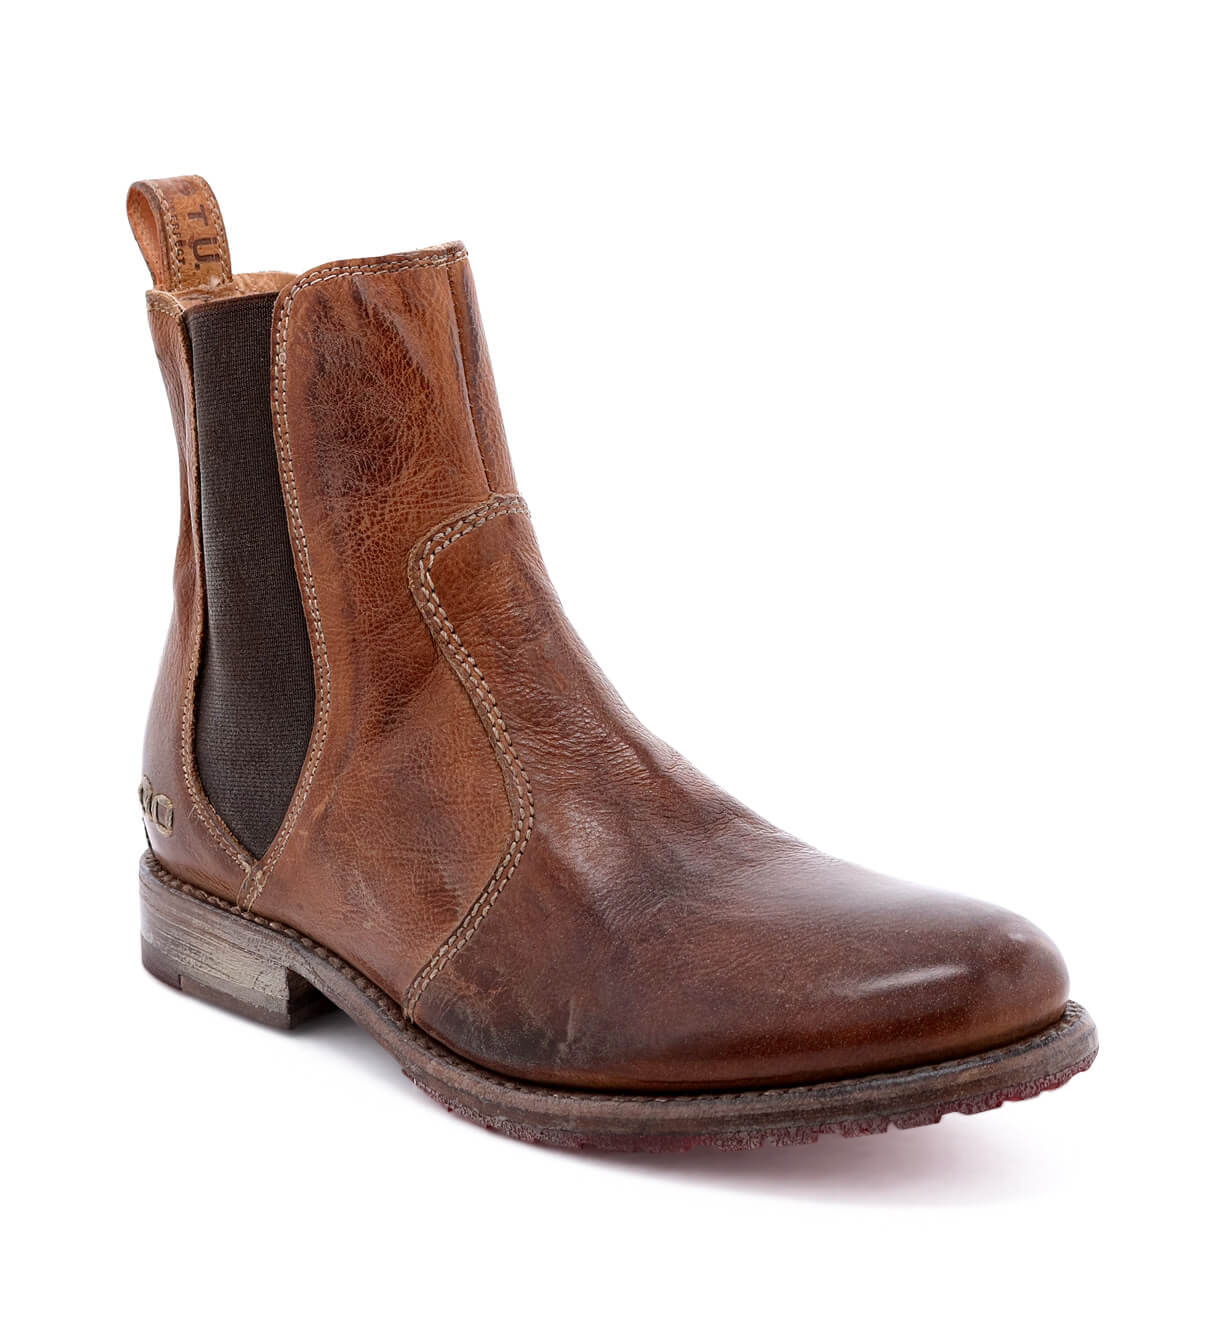 Bed Stu Nandi women's brown leather chelsea boots.